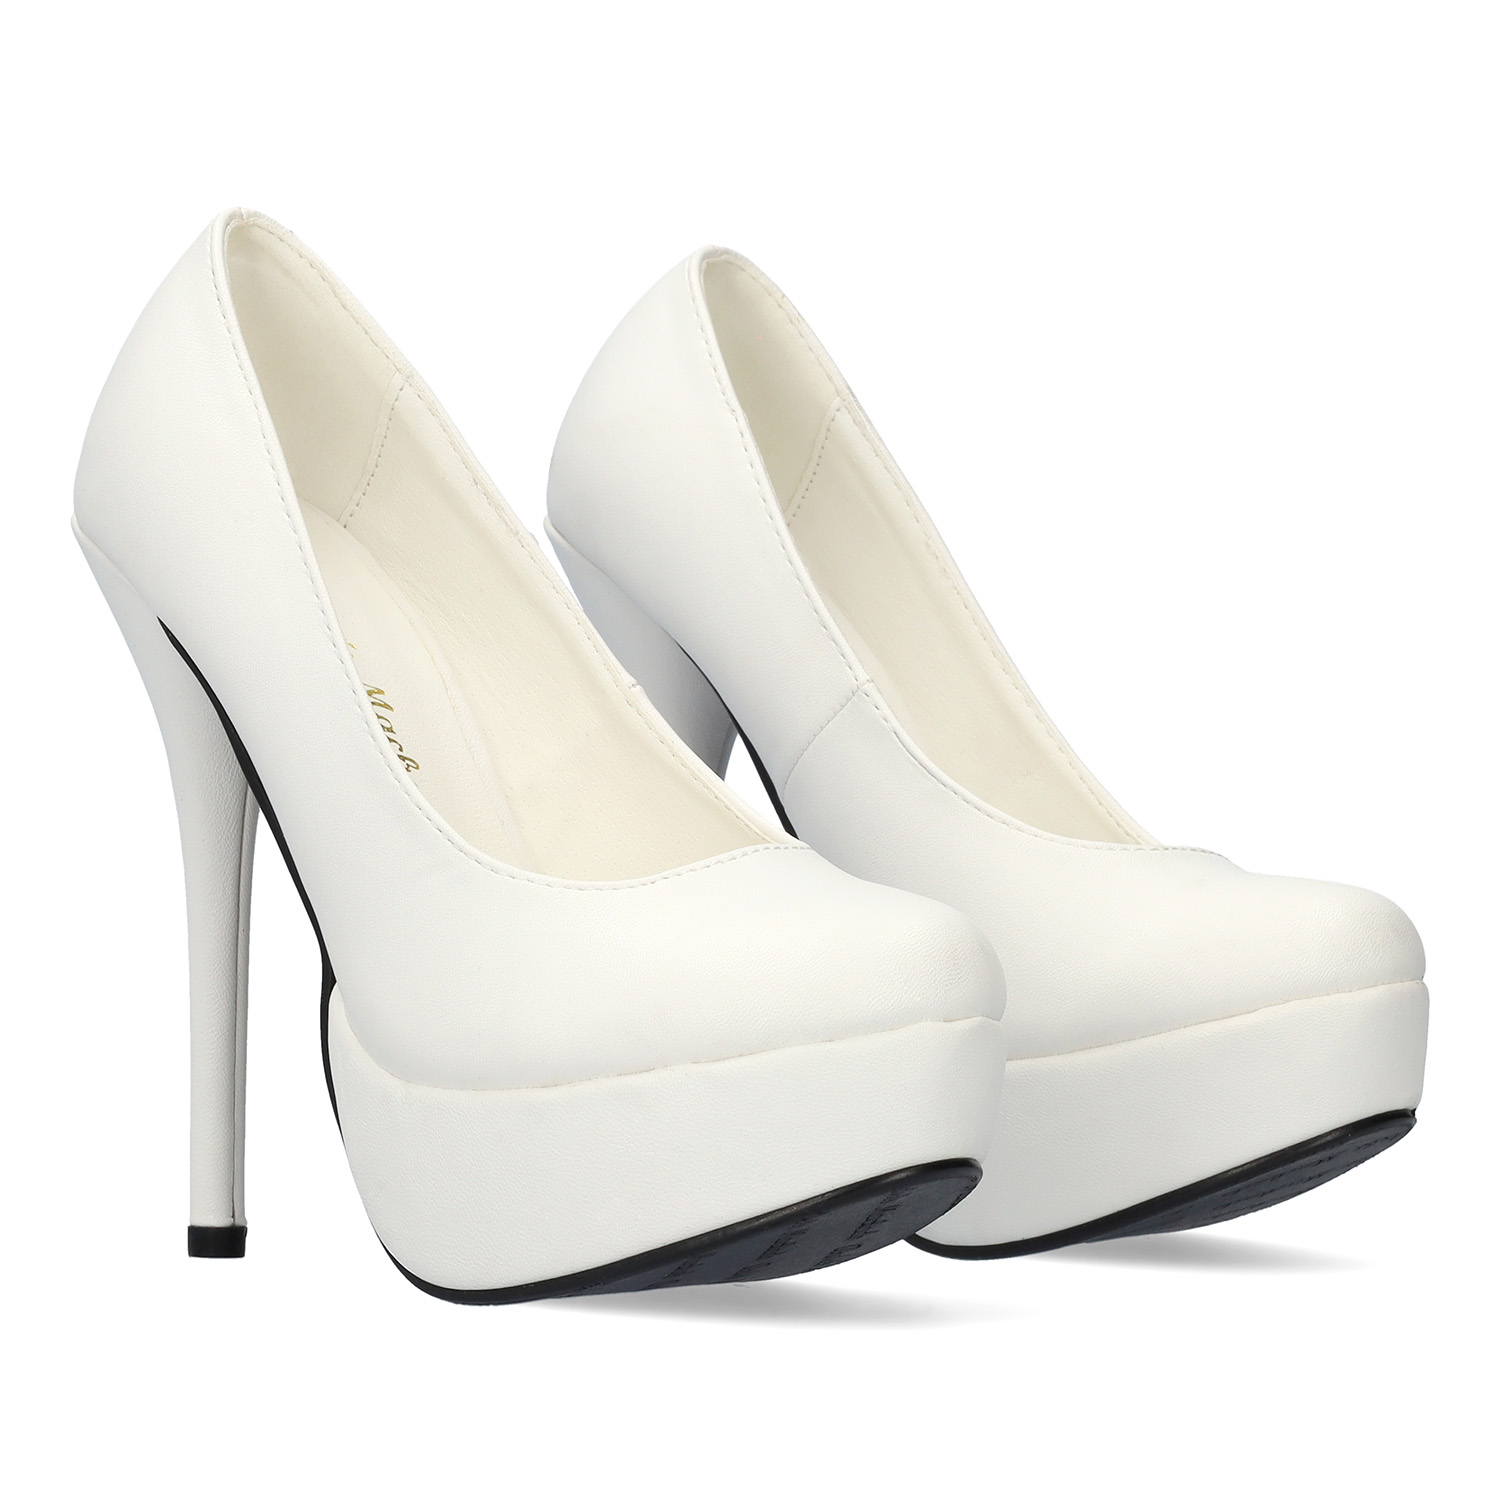 Fat Mary Jane|2023 White Mary Jane Pumps - High Heels Platform Ankle Strap  For Women